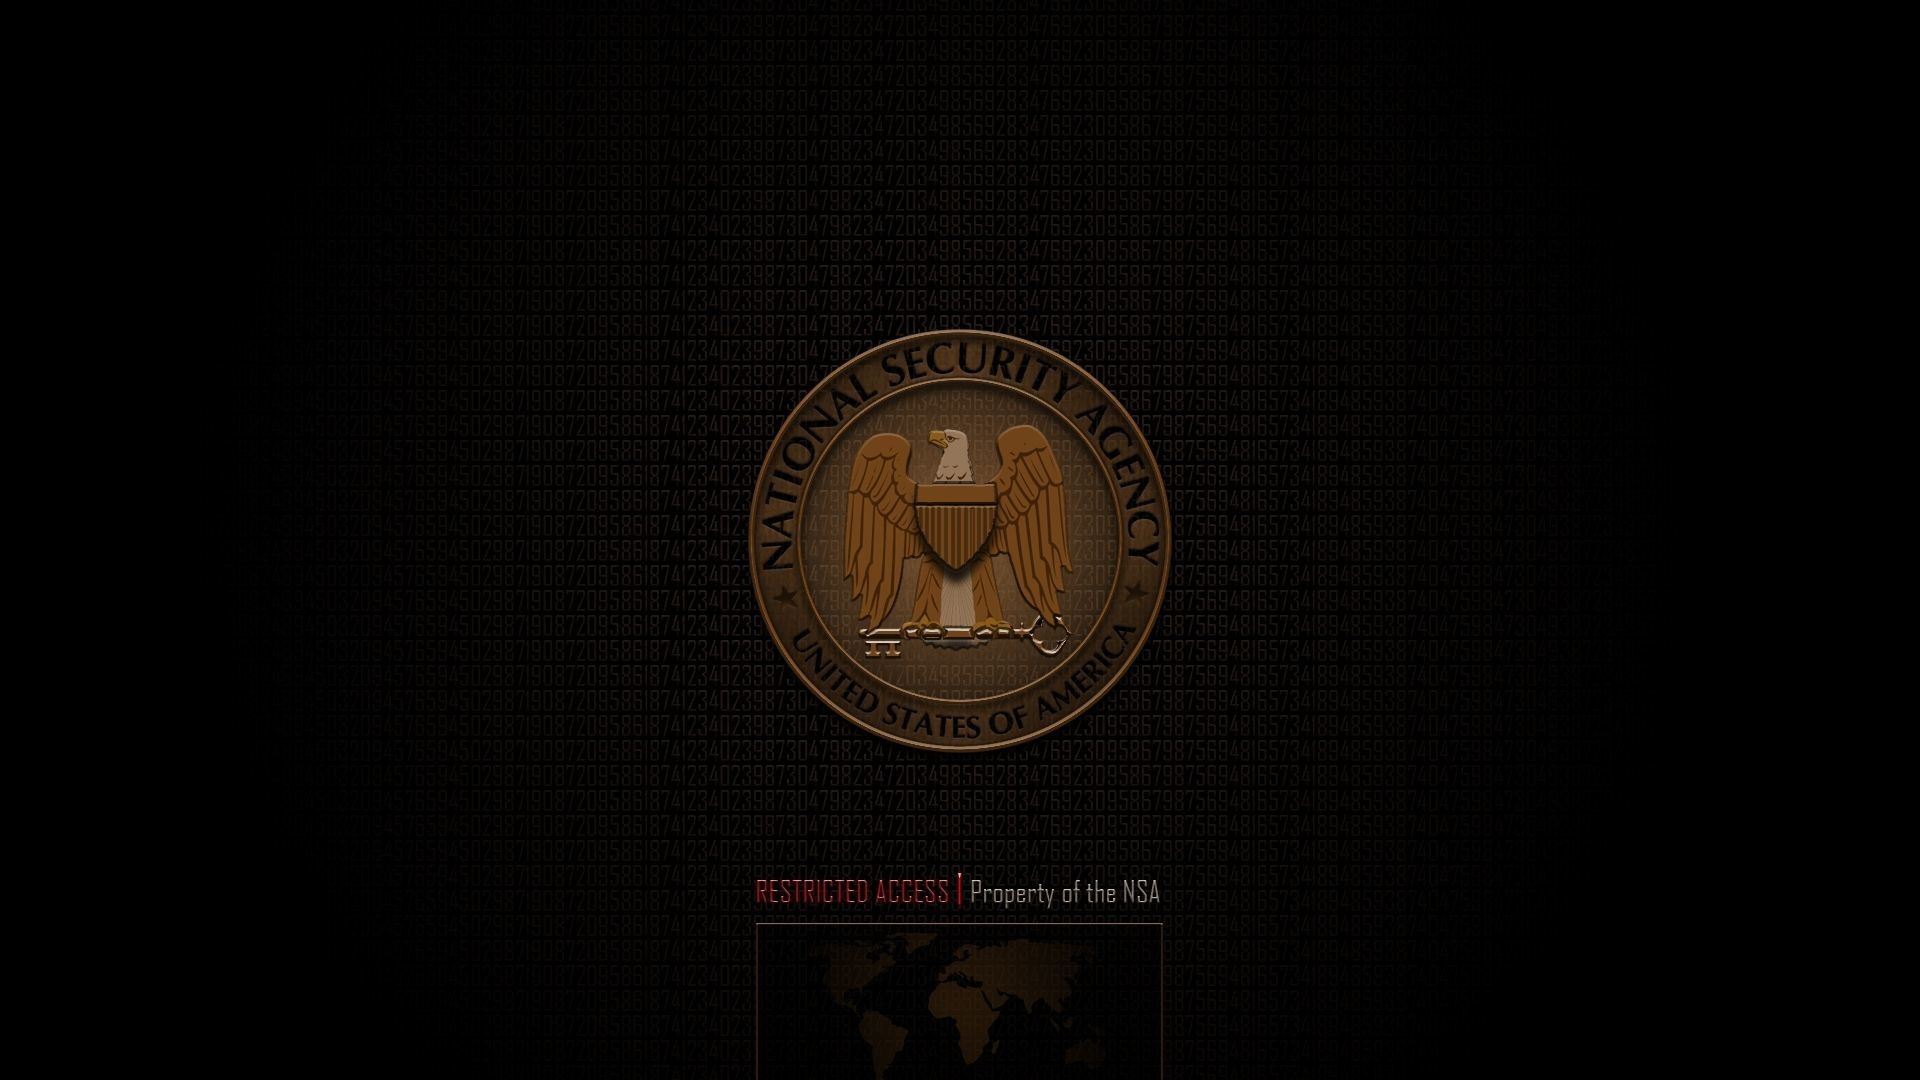 Offensive Security Wallpaper Free Offensive Security Background